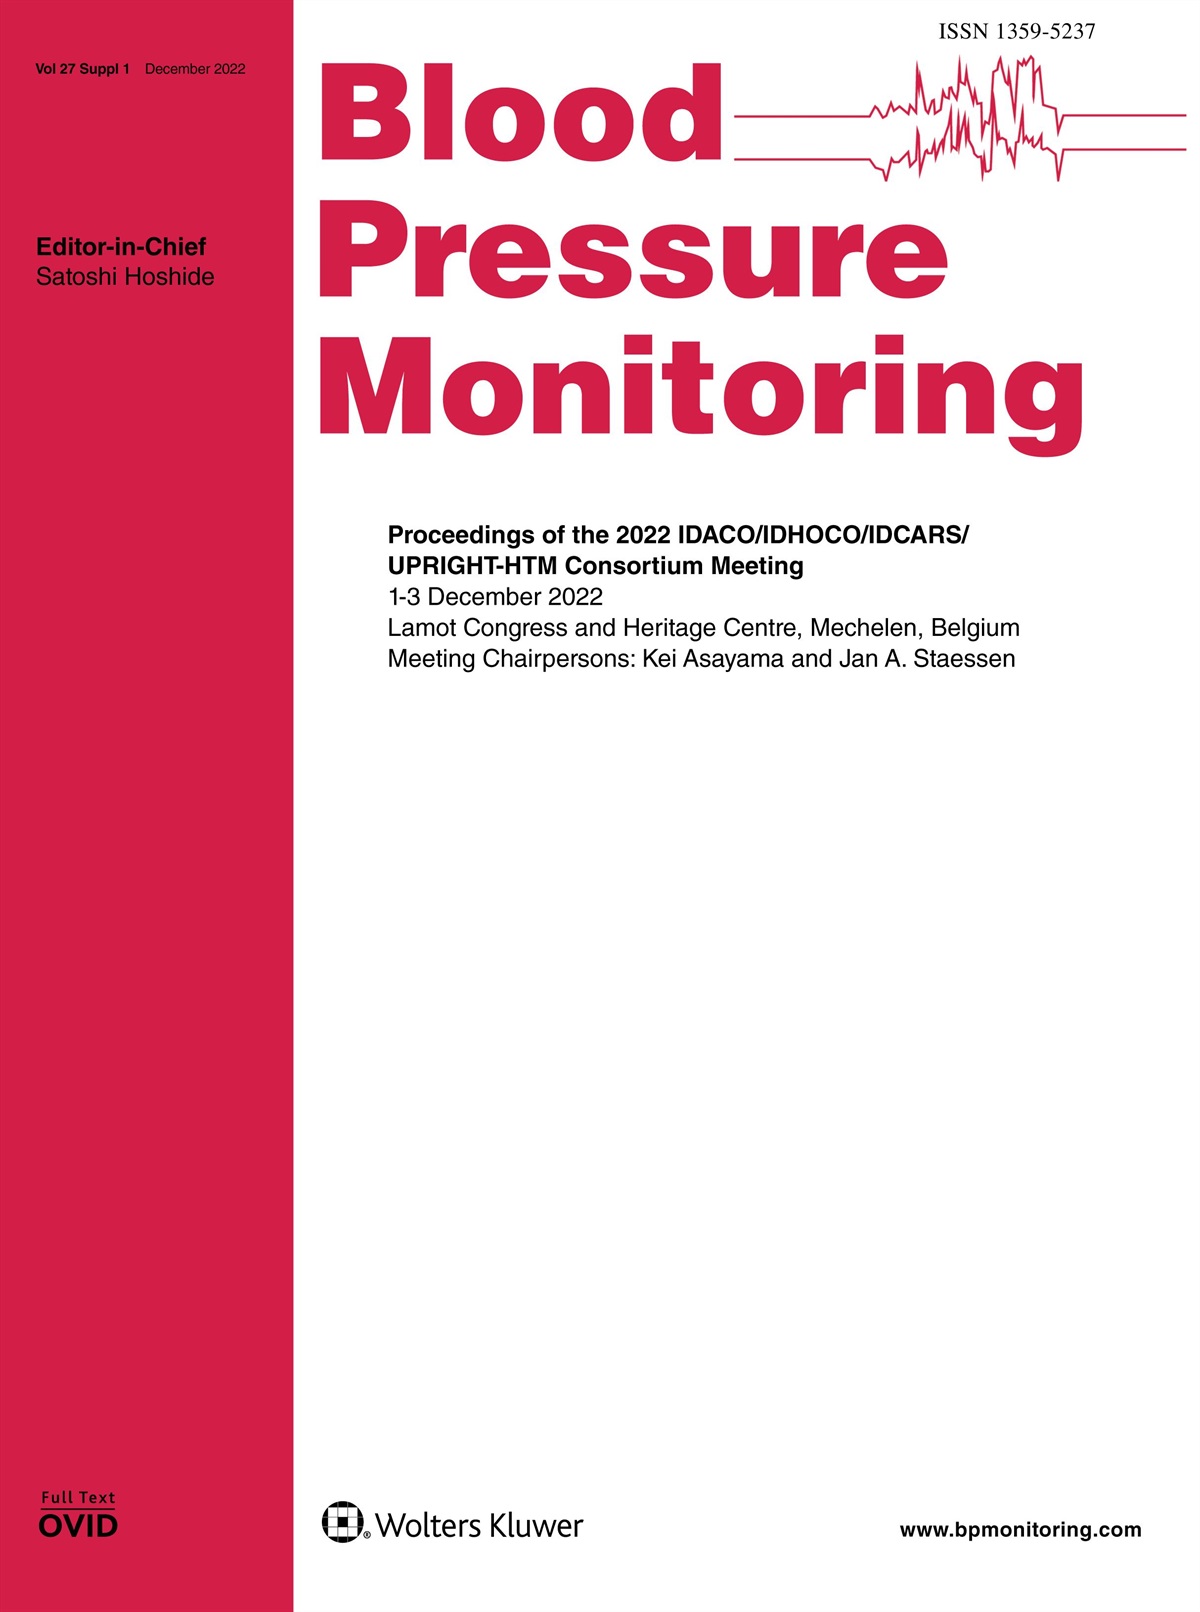 Bradycardia may determine blood-pressure variability: results from real life office measurements of over half a million members of a large health maintenance organization in Israel